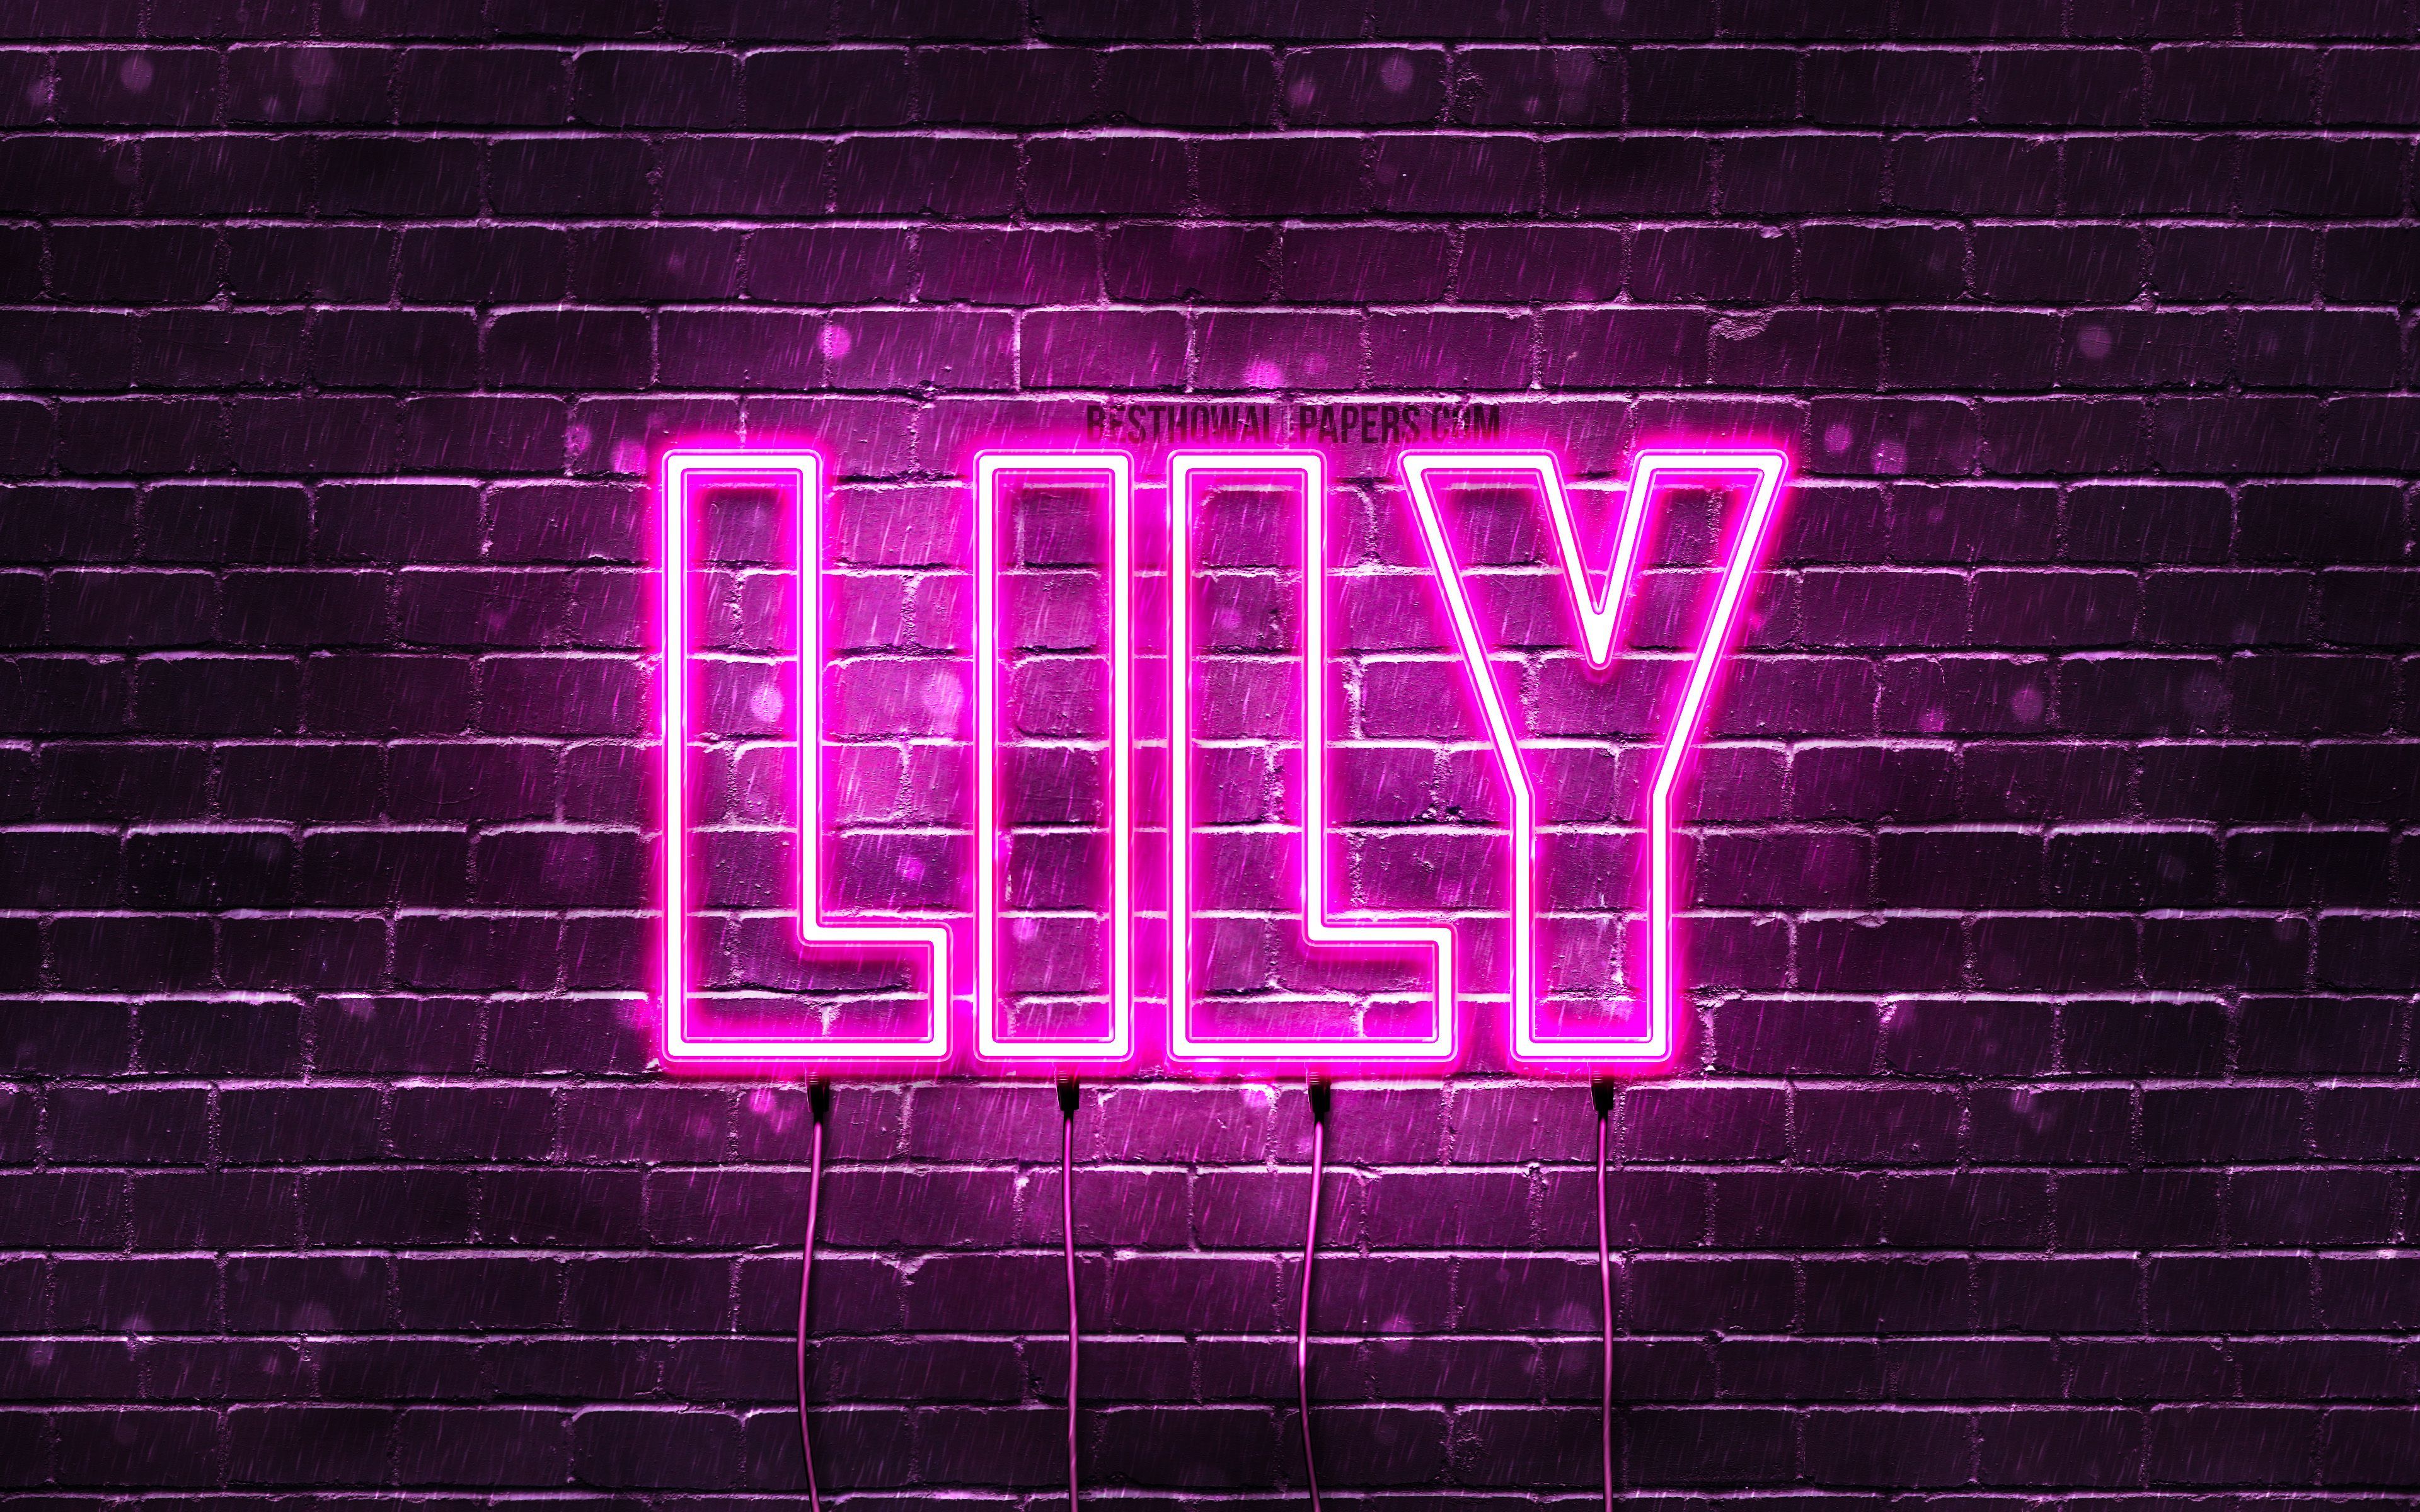 Lily, 4k, wallpaper with names, female names, Lily name, purple neon lights, horizontal text, picture with Lily name. Name wallpaper, Neon signs, Lily